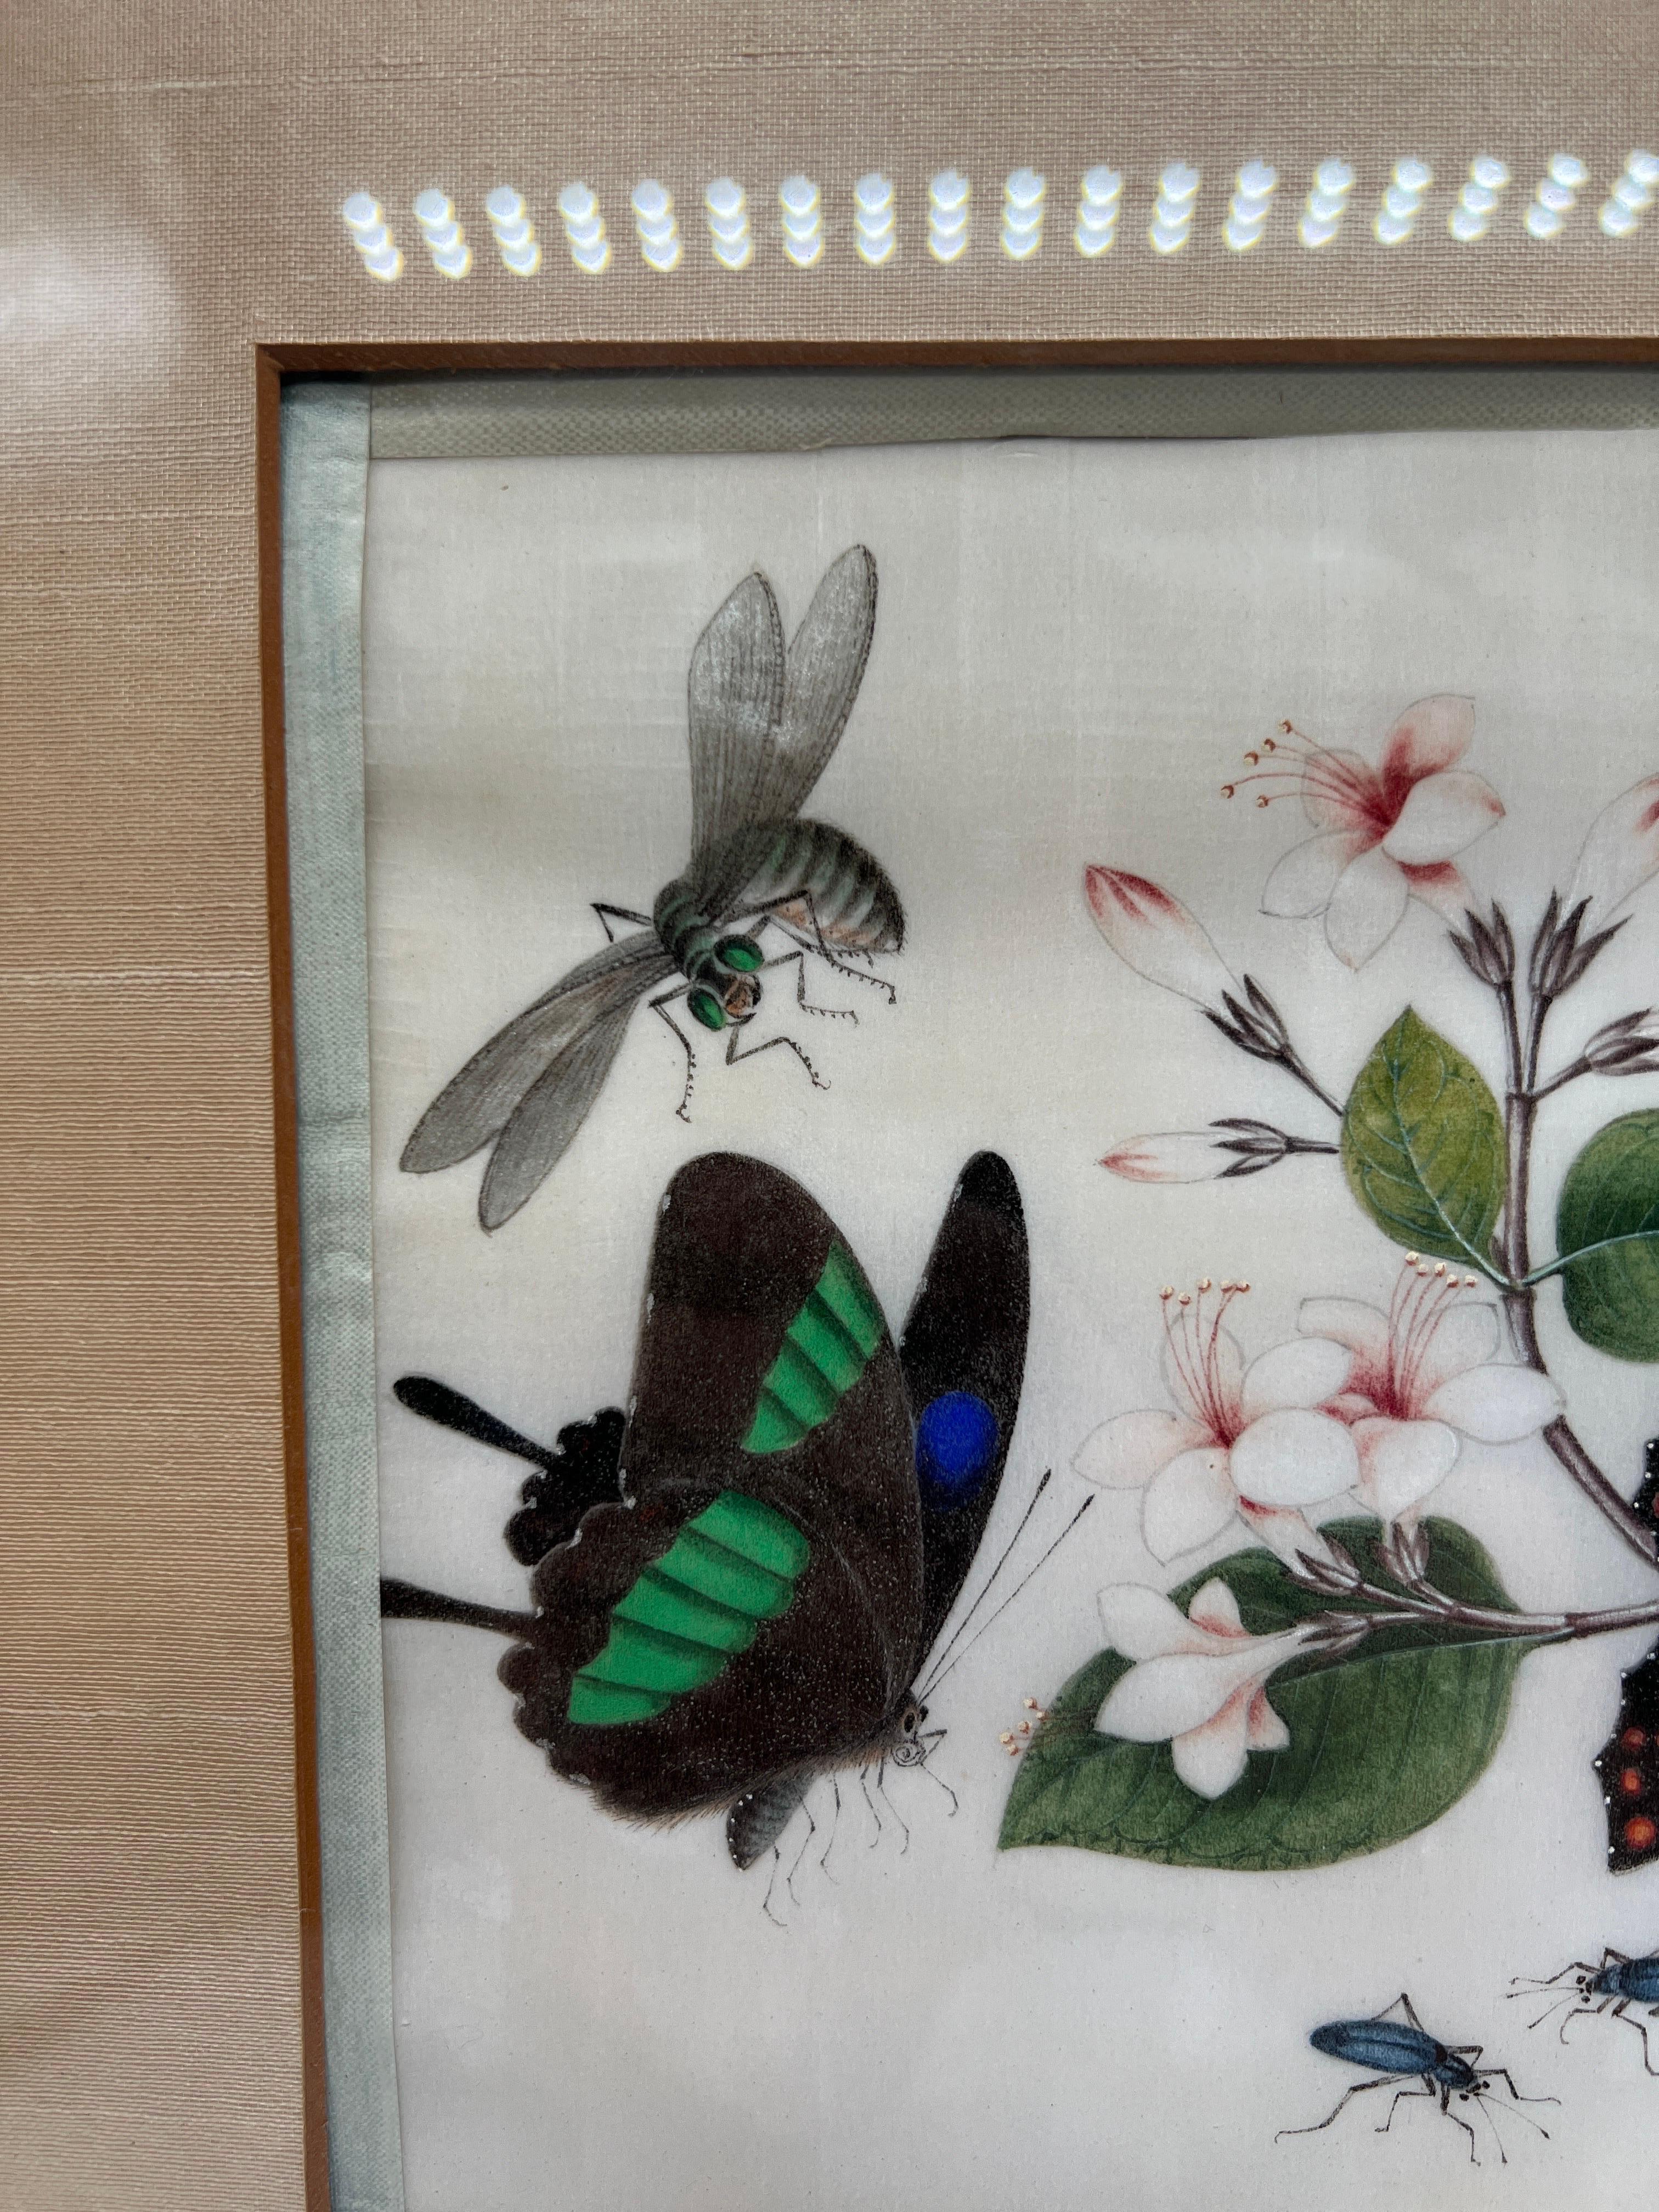 Canton China, circa 1830. 

A great and unusual pith watercolor painting of butterflies and insects around a blossoming tree branch. Unmarked. 